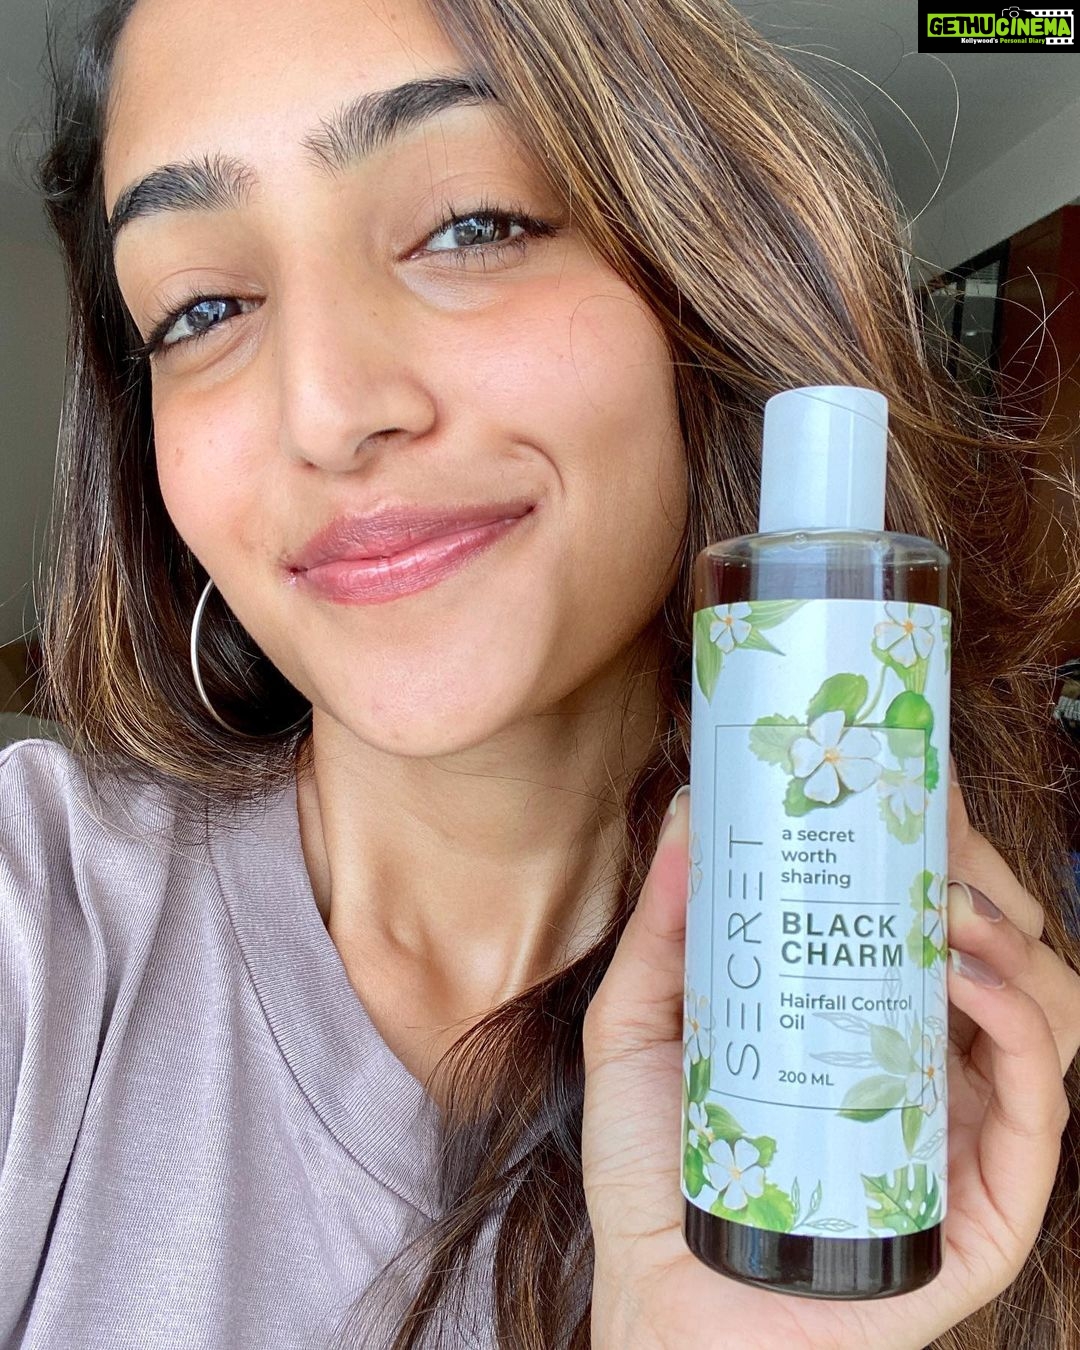 Reba Monica John Instagram - @secrethairoil is a brand I came across  recently. I just can't get enough of their Black Charm Hair Oil. Made with  indigenous ingredients sourced ethically from Kerala,